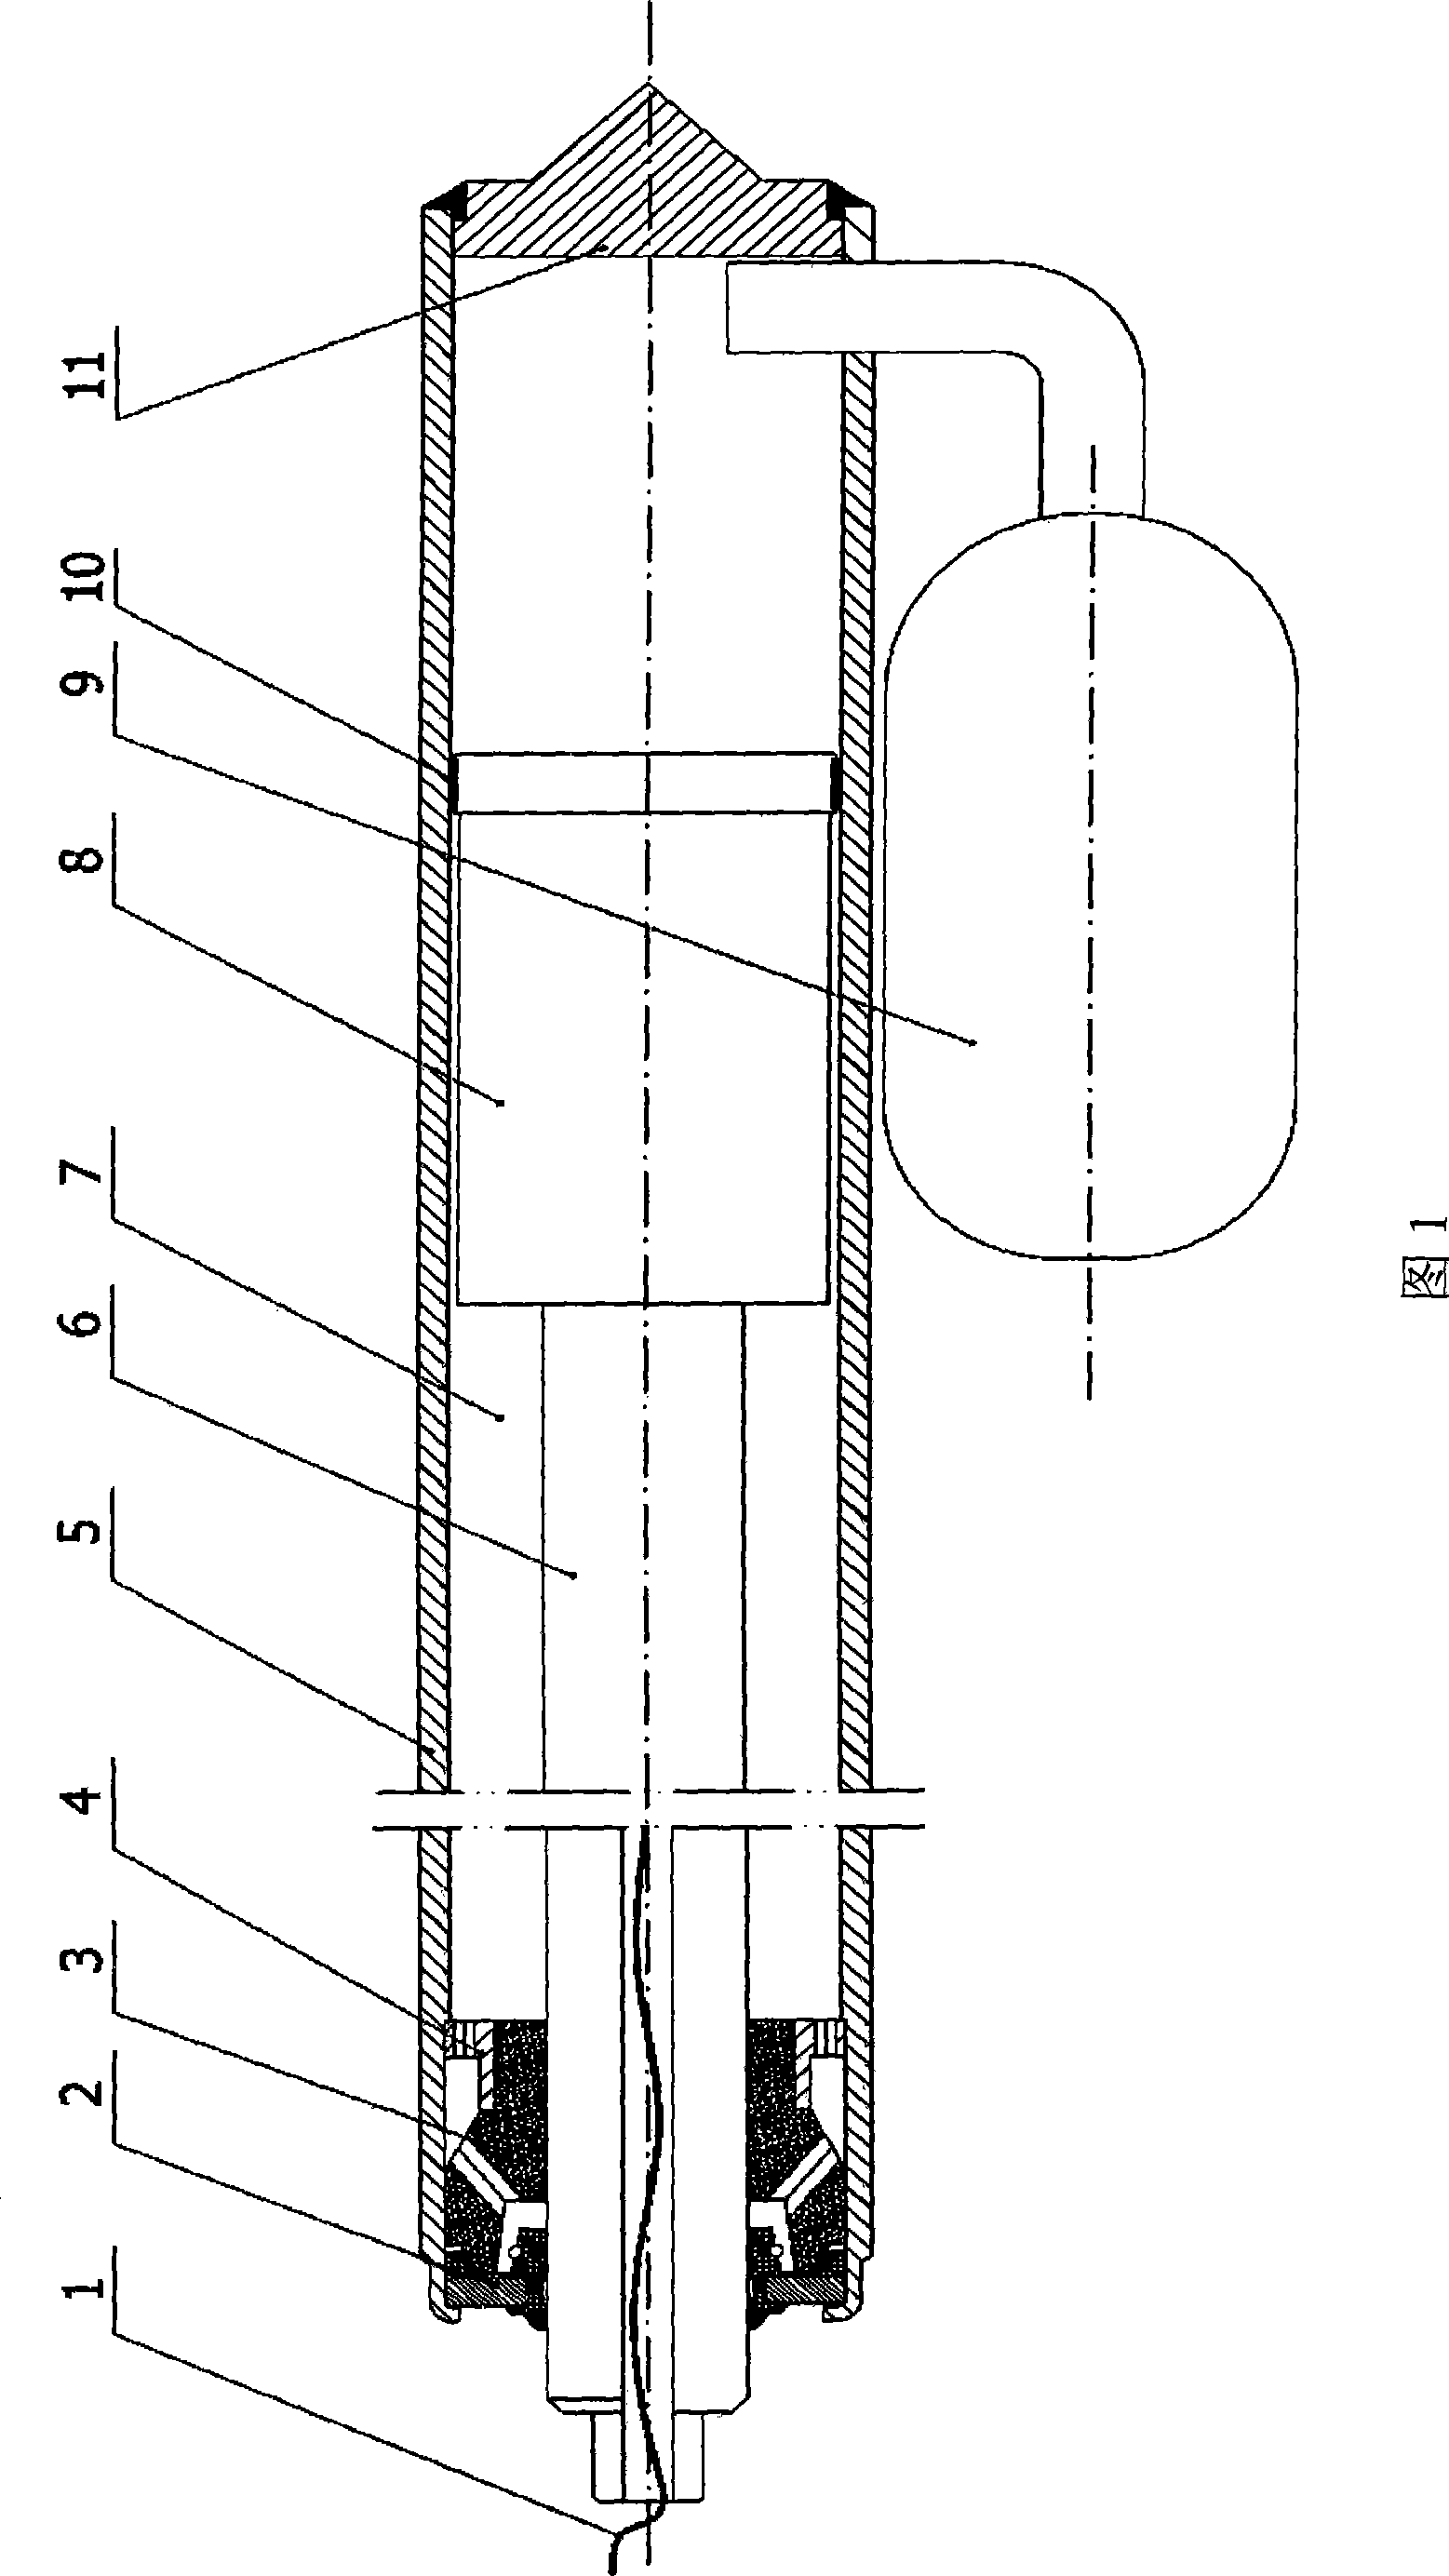 Two-channel magnetorheological damper with passage gating capability